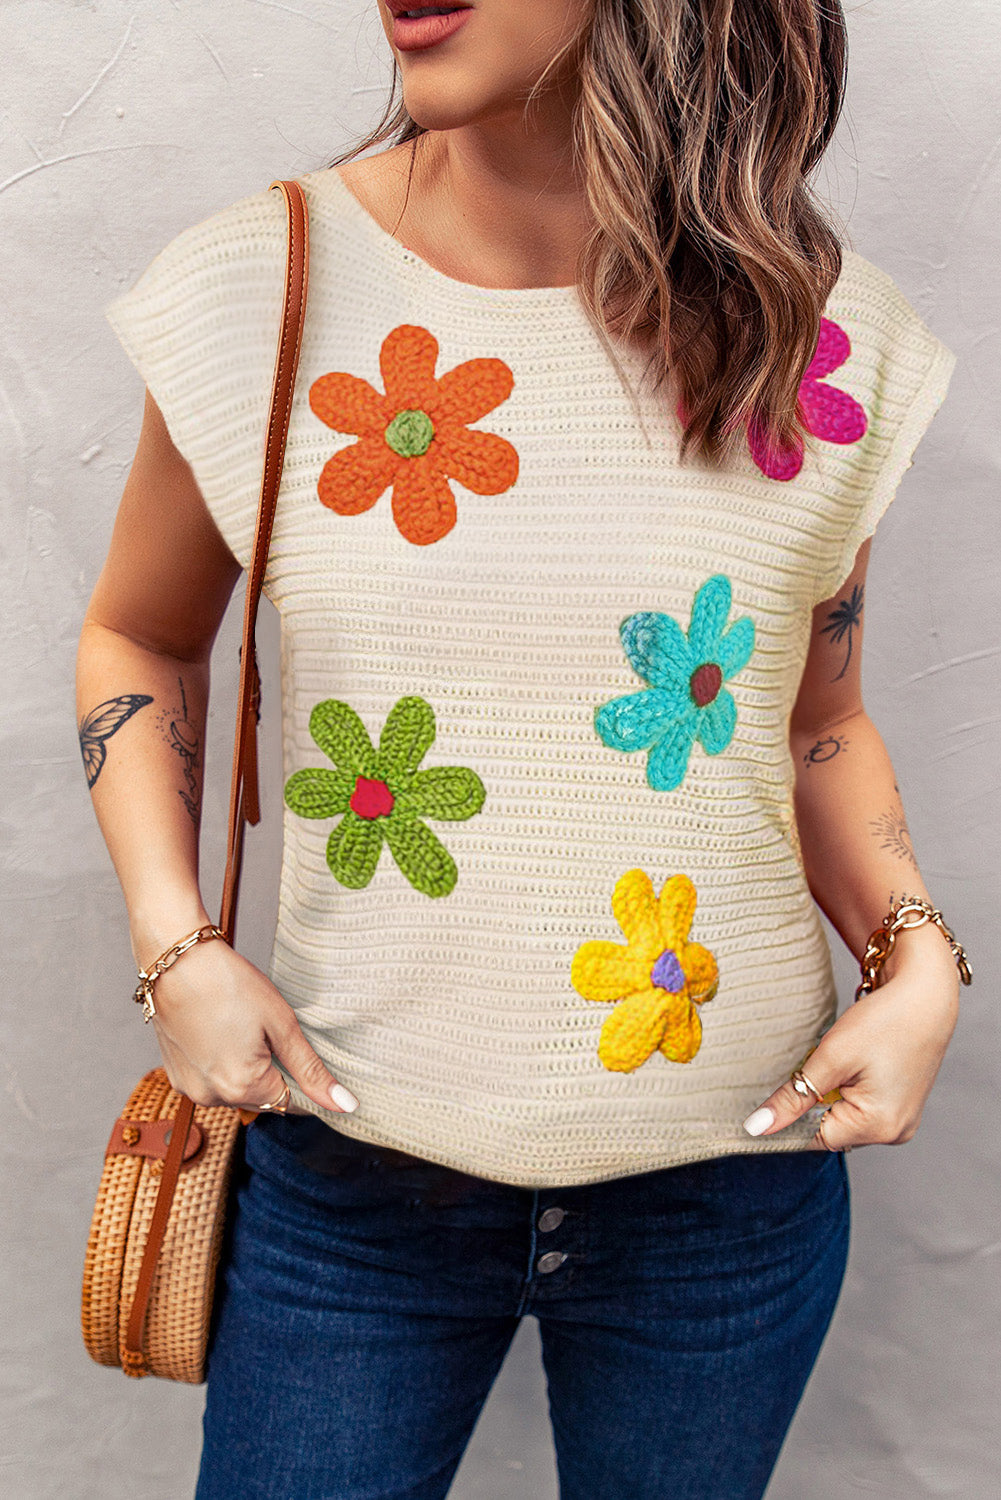 Embrace spring with our Flower Knit Top—perfect for adding a touch of floral charm and comfort to your everyday style